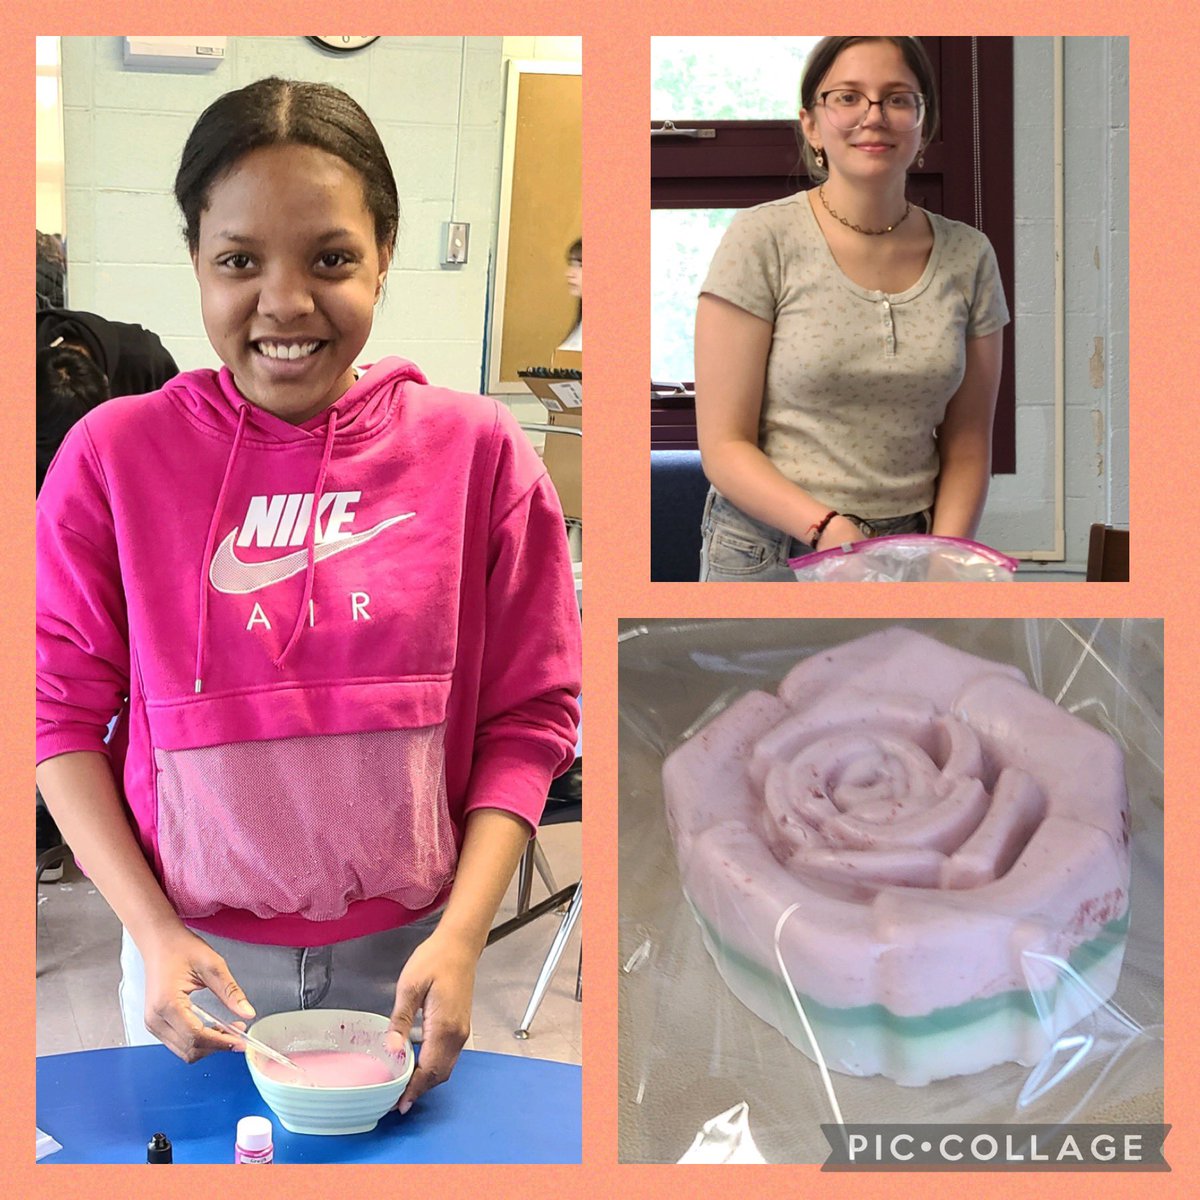 10th grade co-Presidents Zanyah & Kristen created several decorative soaps while welcoming & helping new members #studentleaders